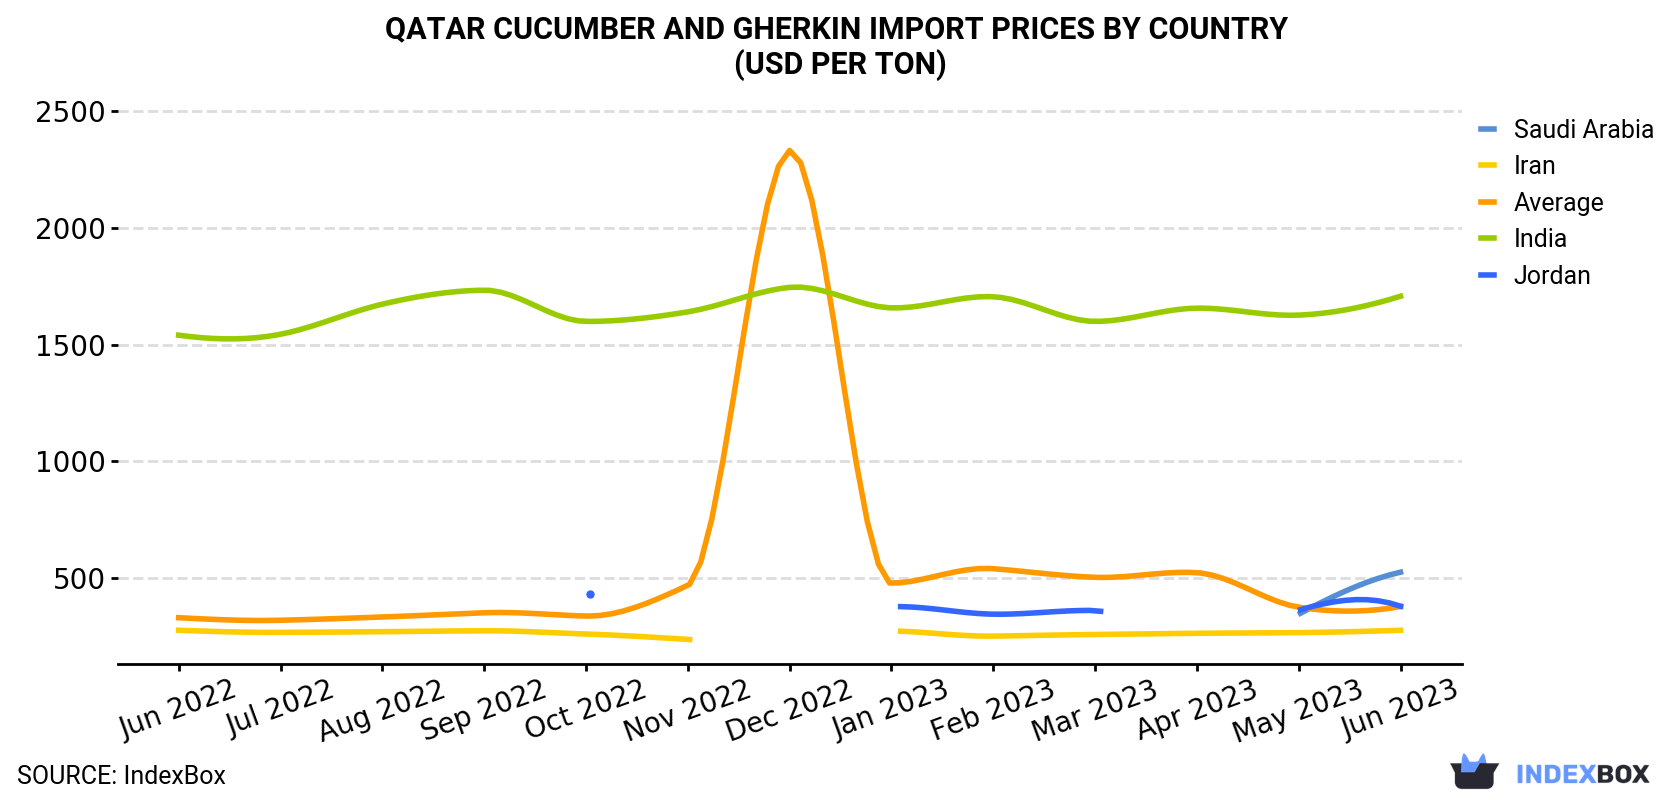 Qatar Cucumber And Gherkin Import Prices By Country (USD Per Ton)